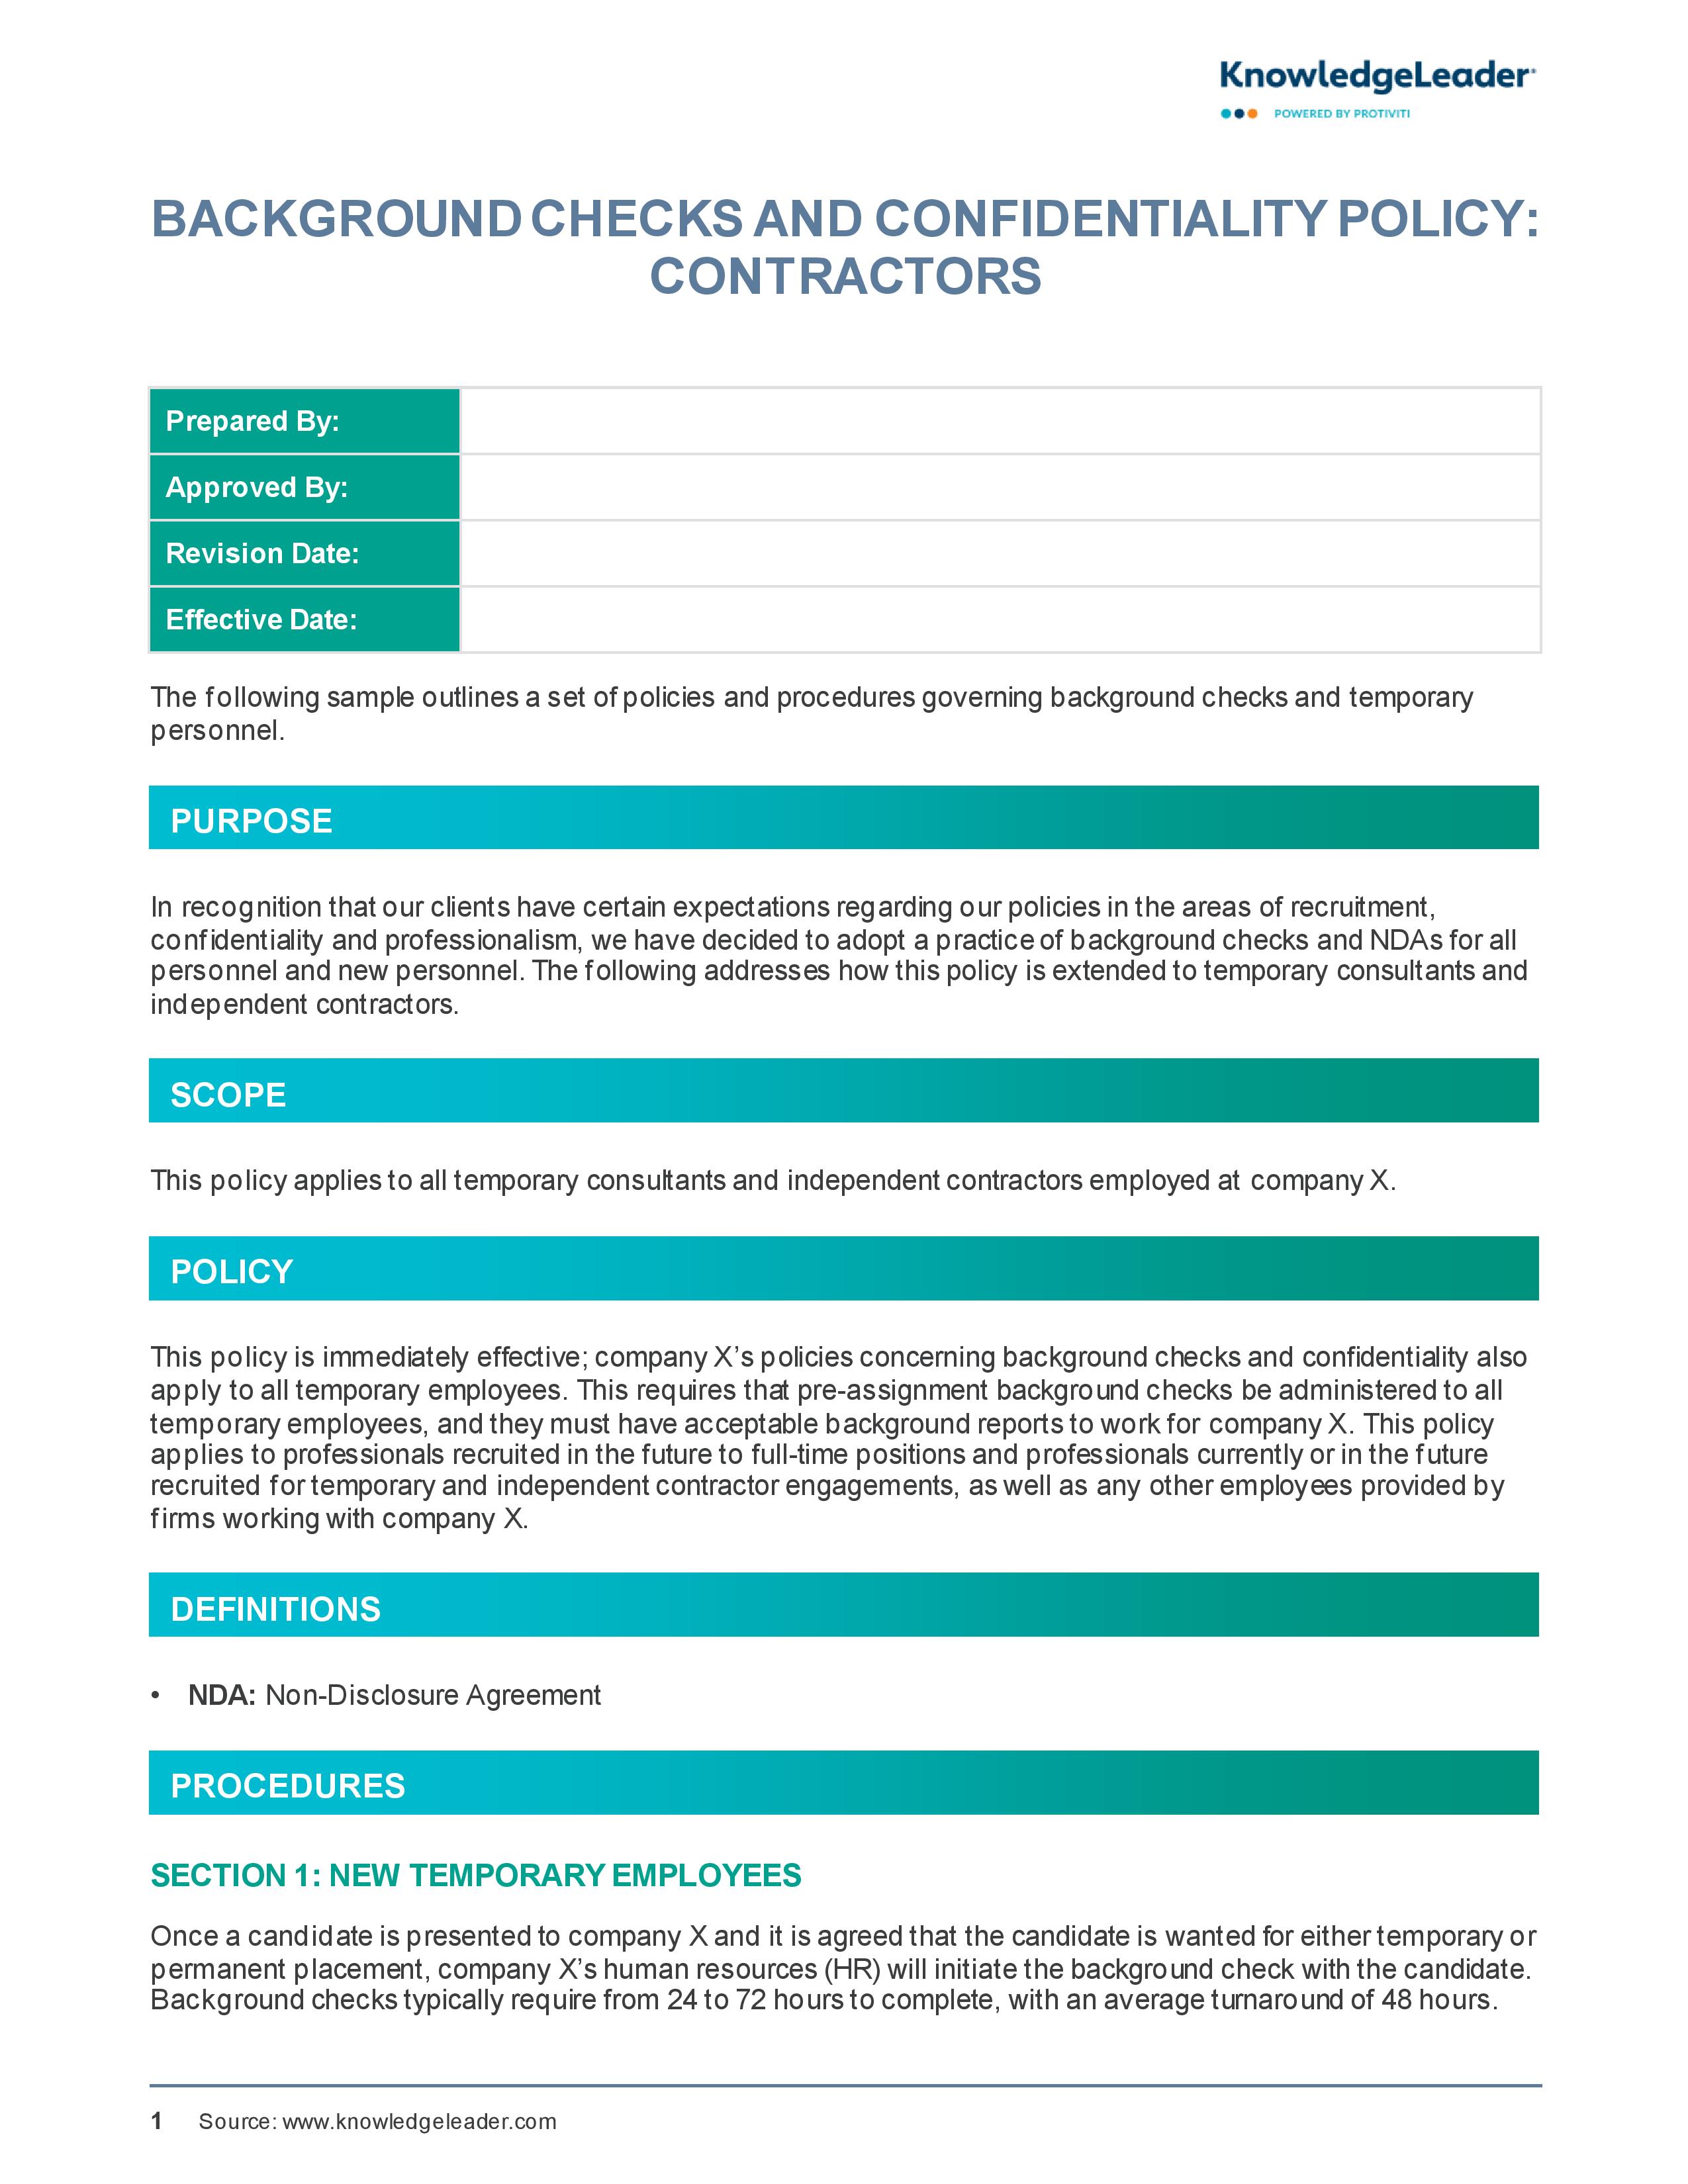 Screenshot of the first page of Background Checks and Confidentiality Policy - Contractors